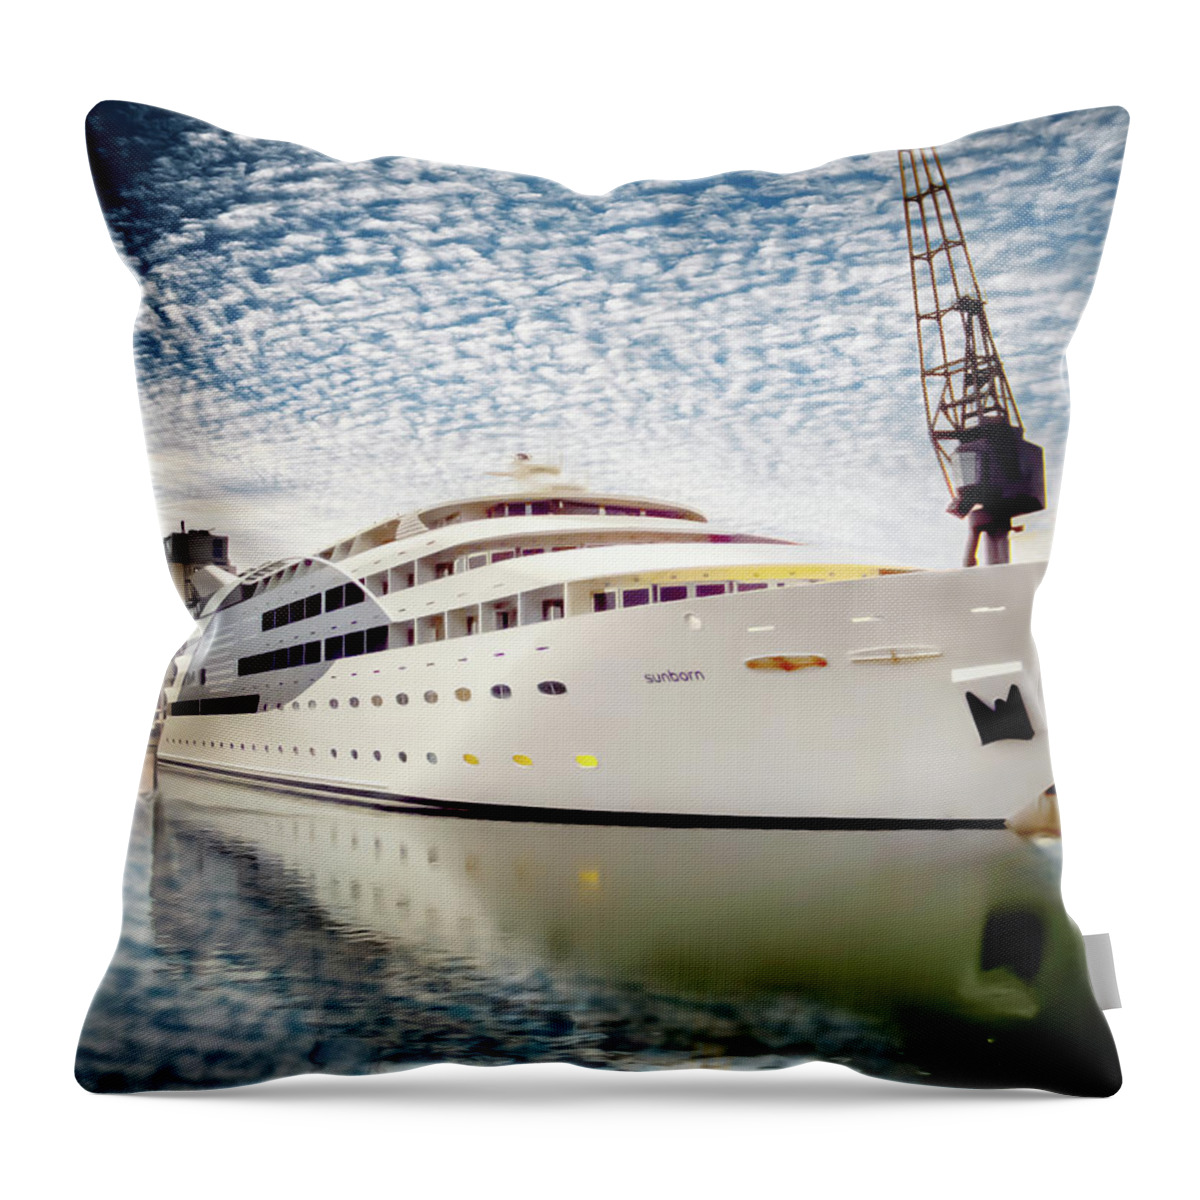 Yacht Throw Pillow featuring the photograph Sunborn by Jack Torcello